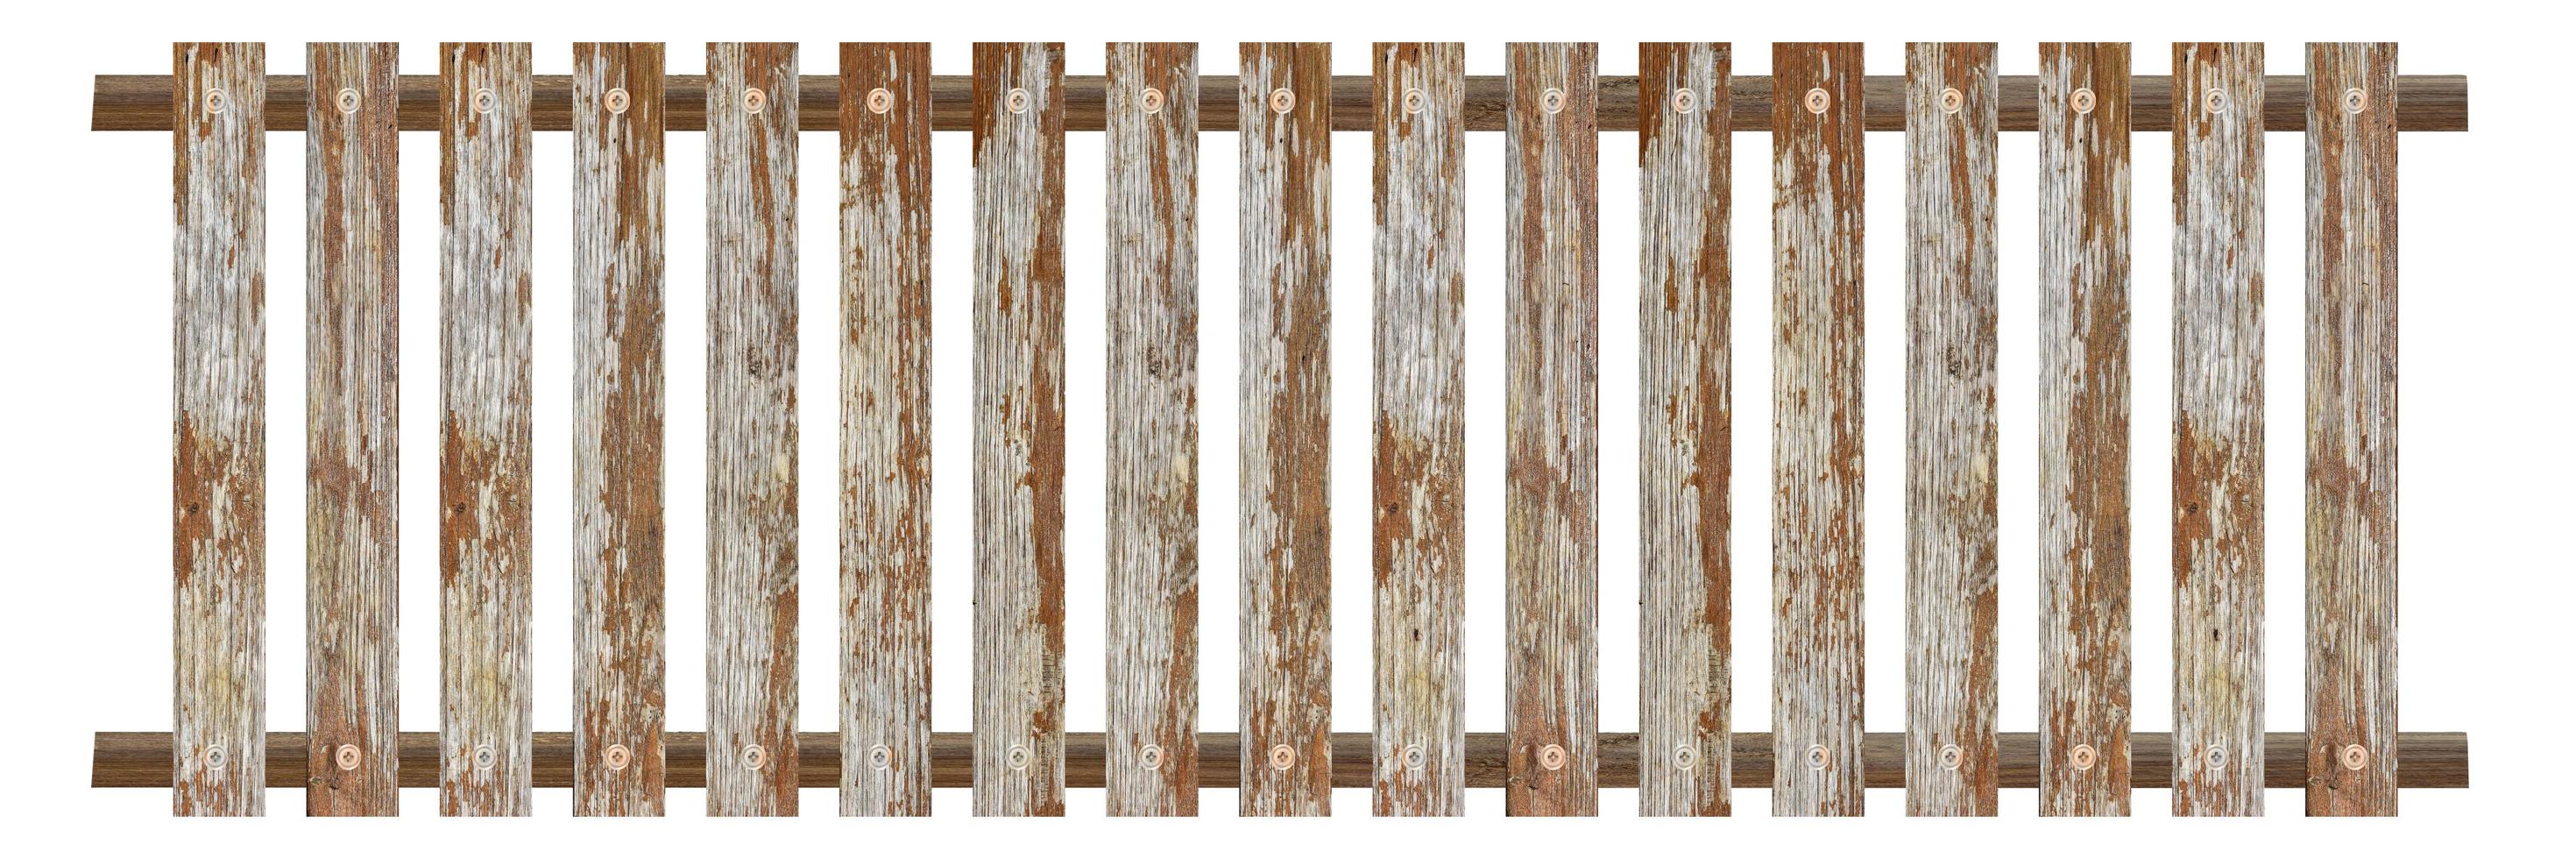 Wooden fence isolated on white background. Object with clipping path. photo